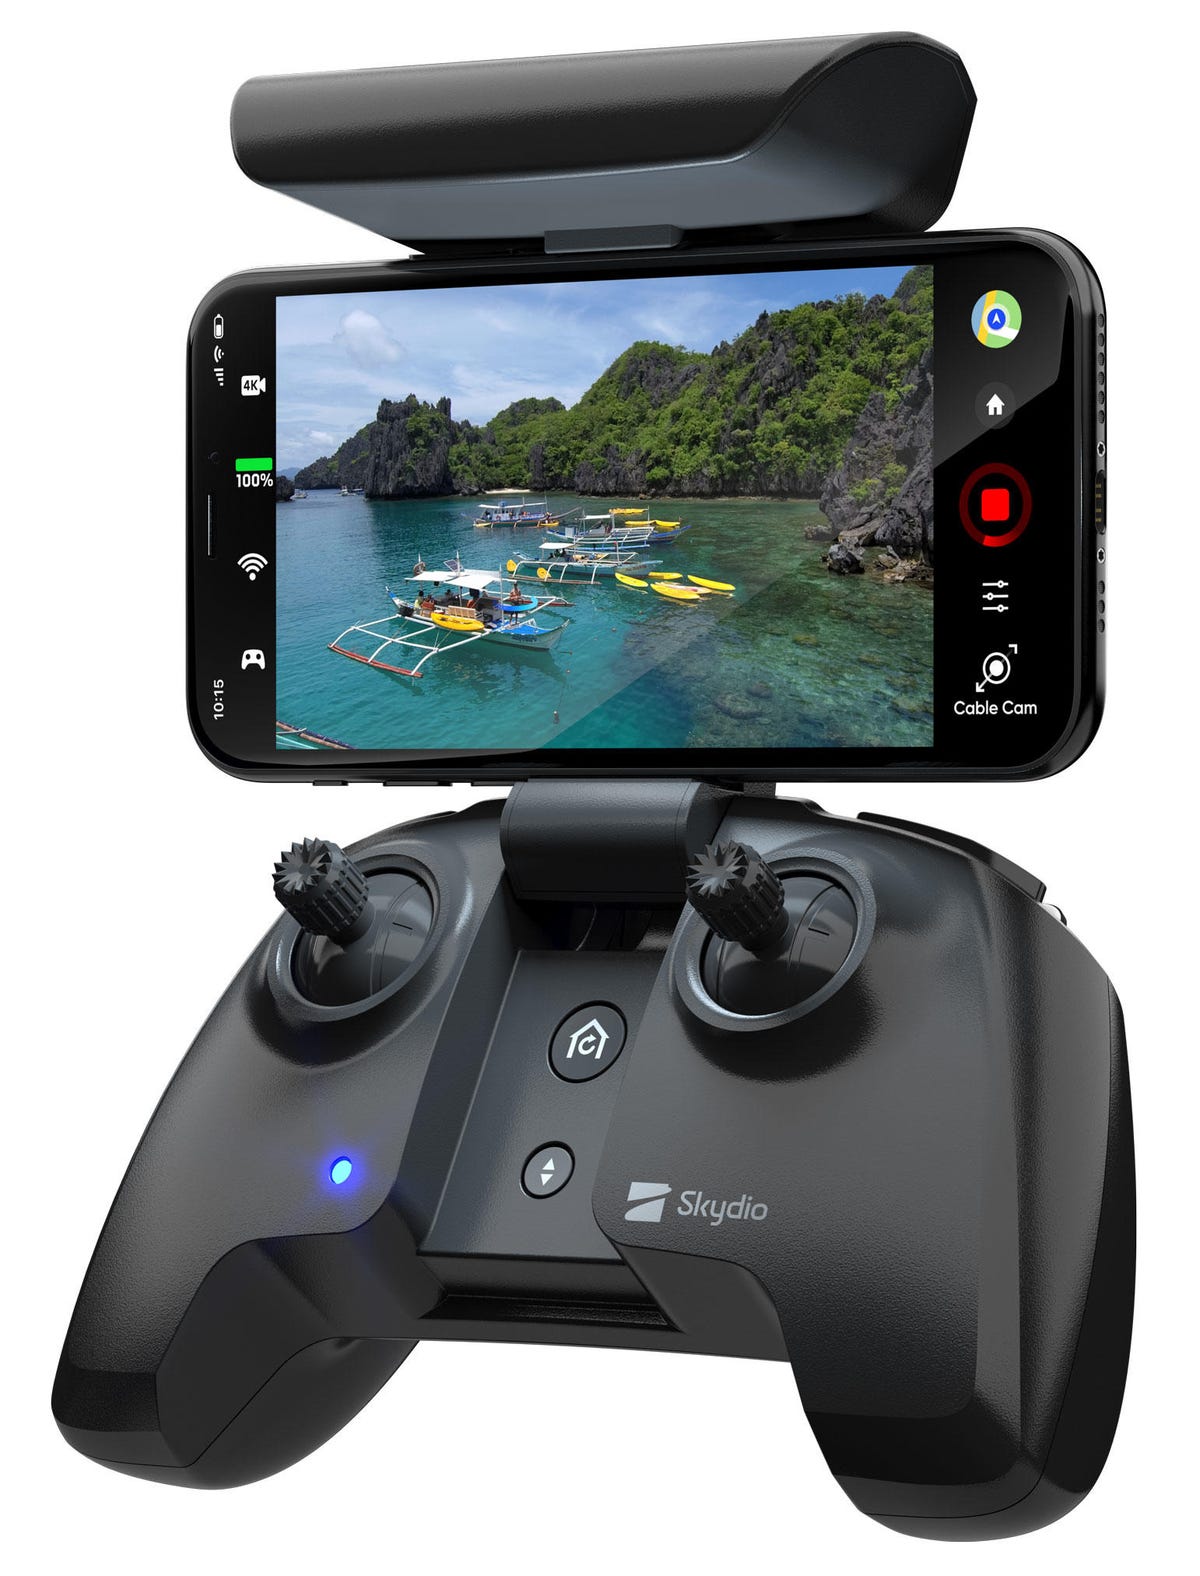 The Skydio R2 joystick controller has a spring-loaded clasp for a phone.